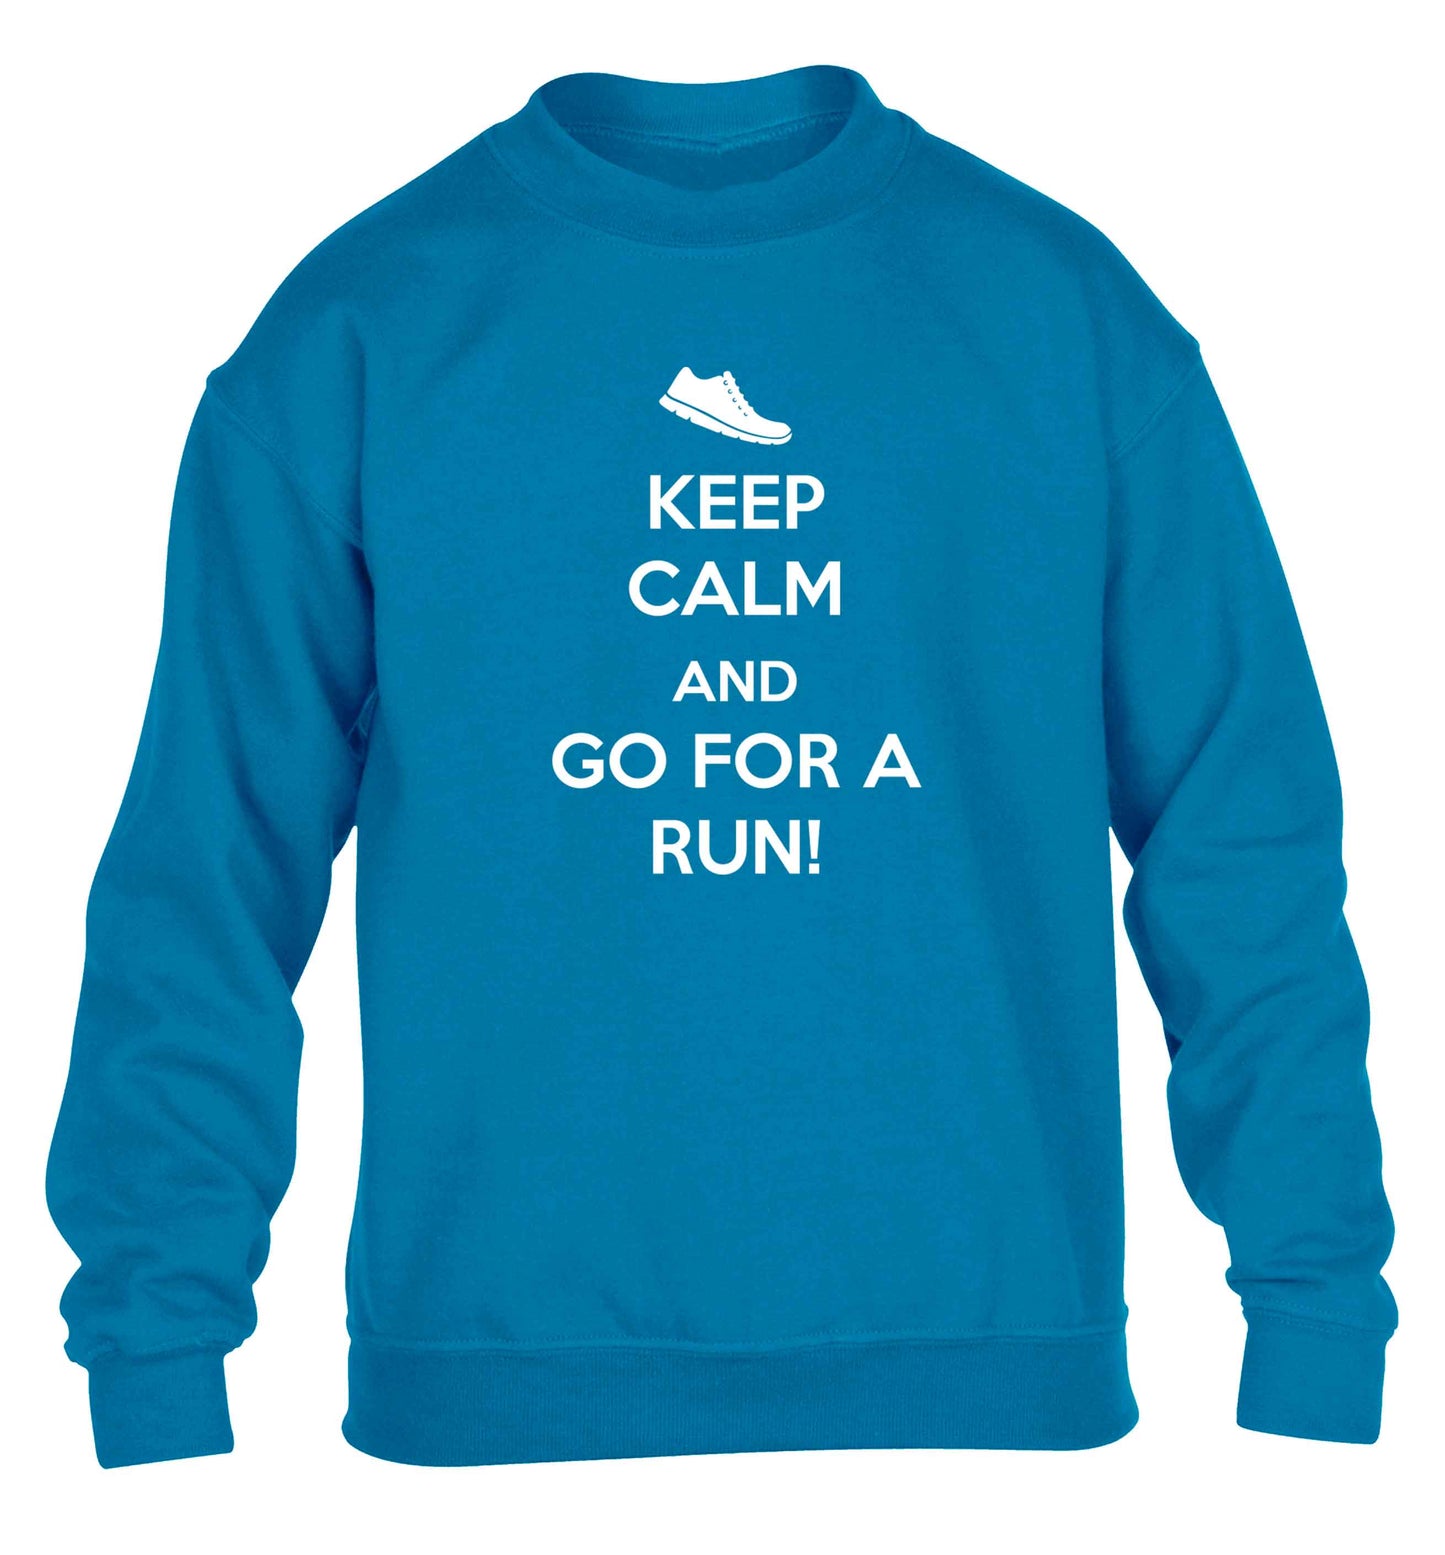 Keep calm and go for a run children's blue sweater 12-13 Years